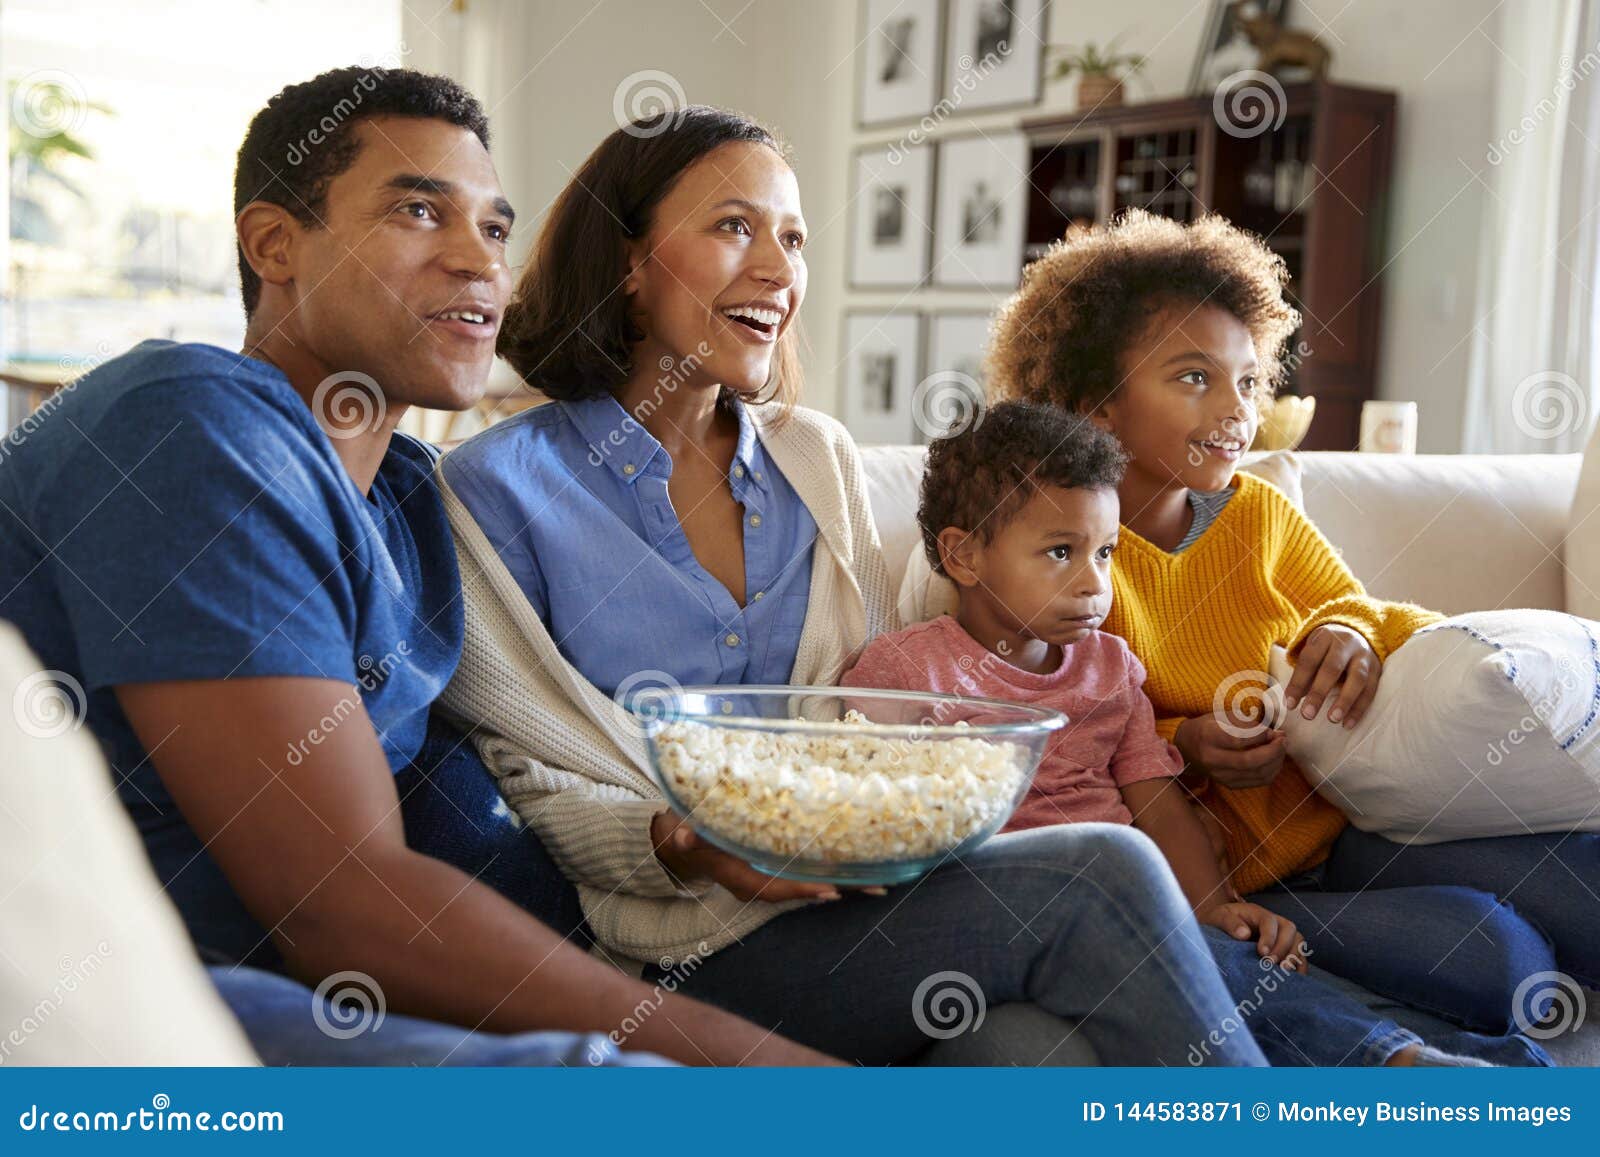 young family sitting together on the sofa in their living room watching tv and eating popcorn, side view